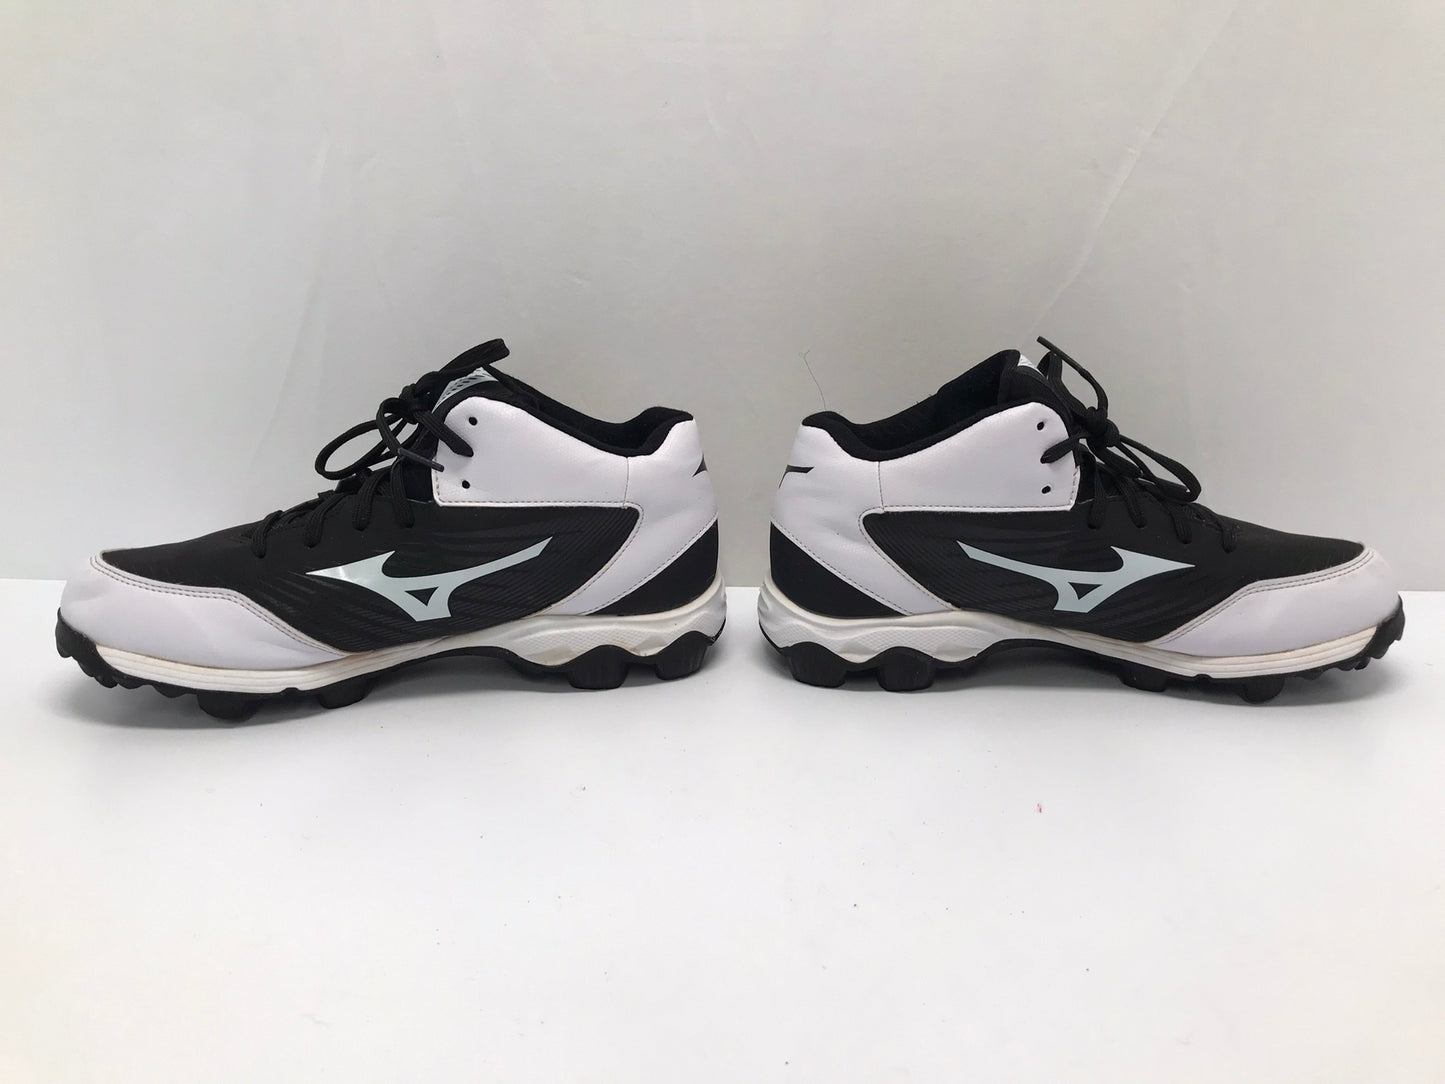 Baseball Shoes Cleats Ladies Size 9 Spike Black White As New